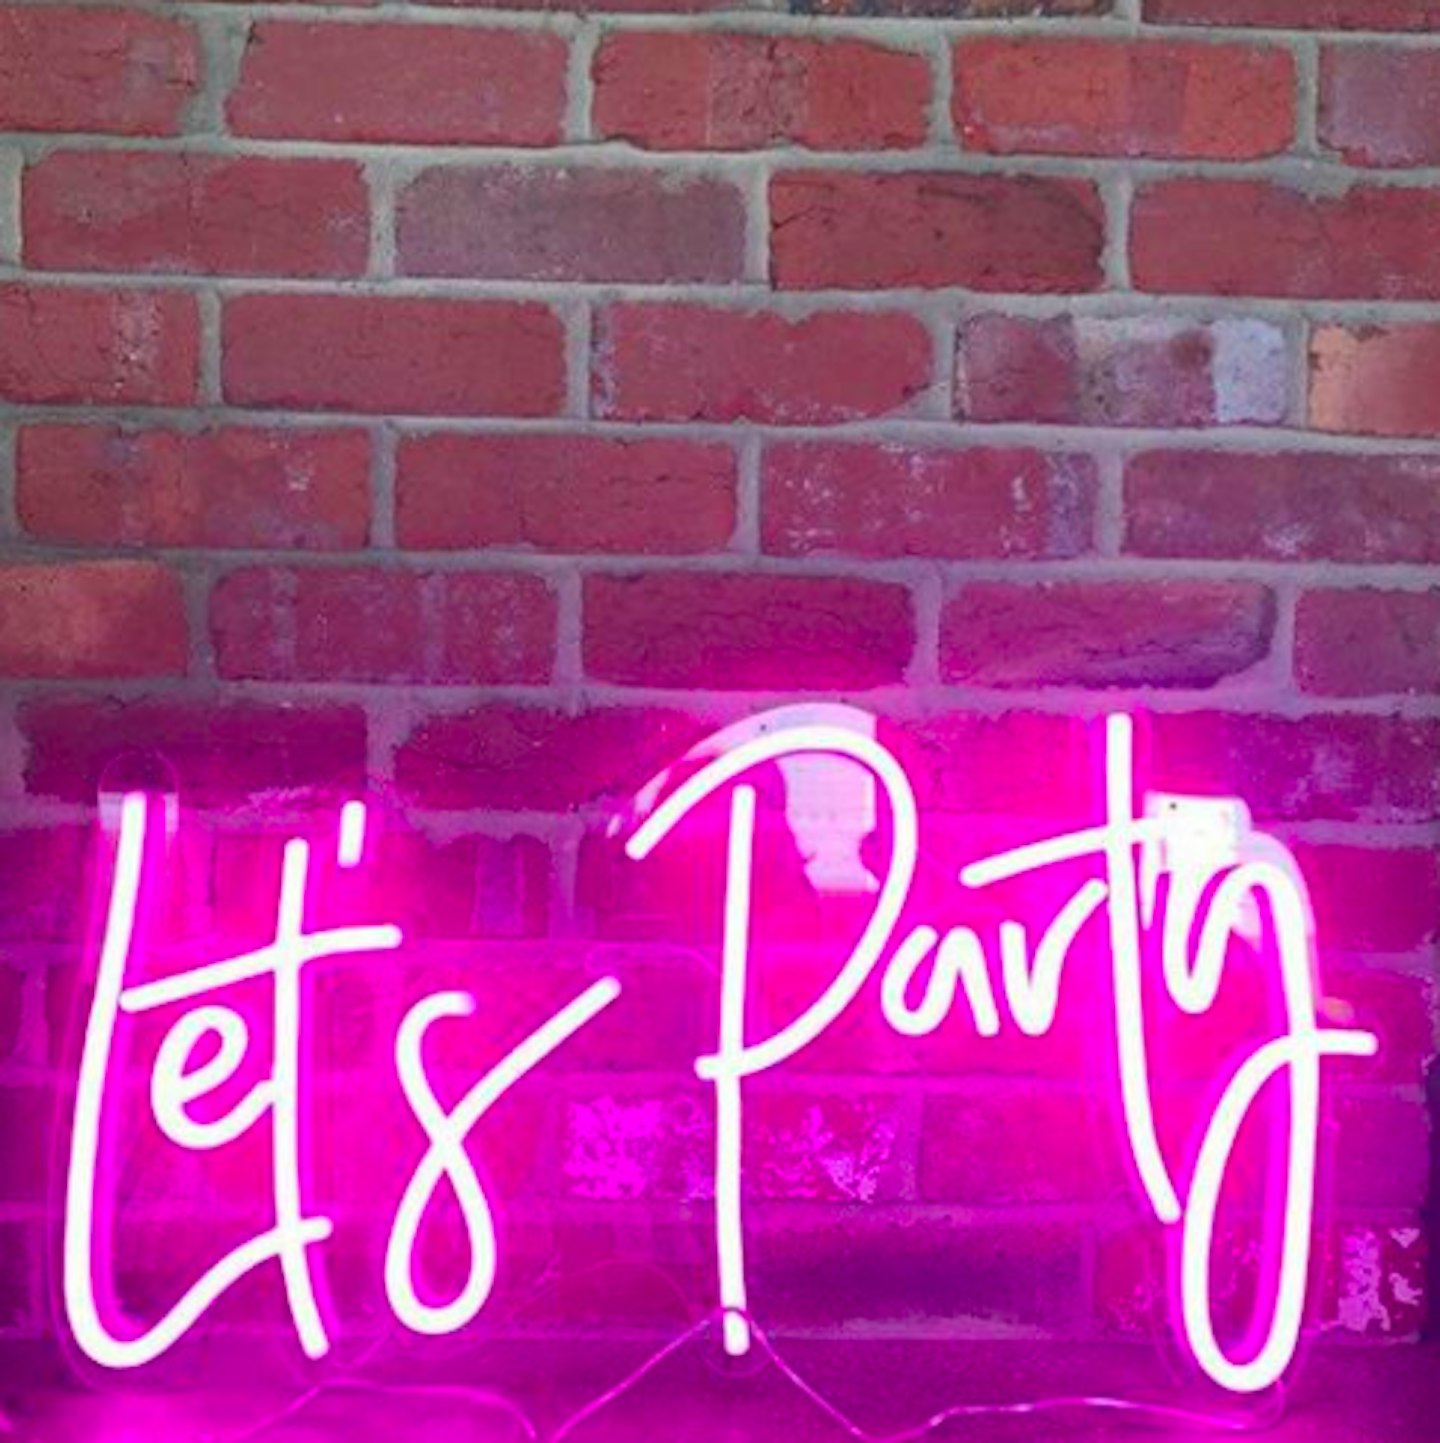 LED Neon Light -- Let's Party